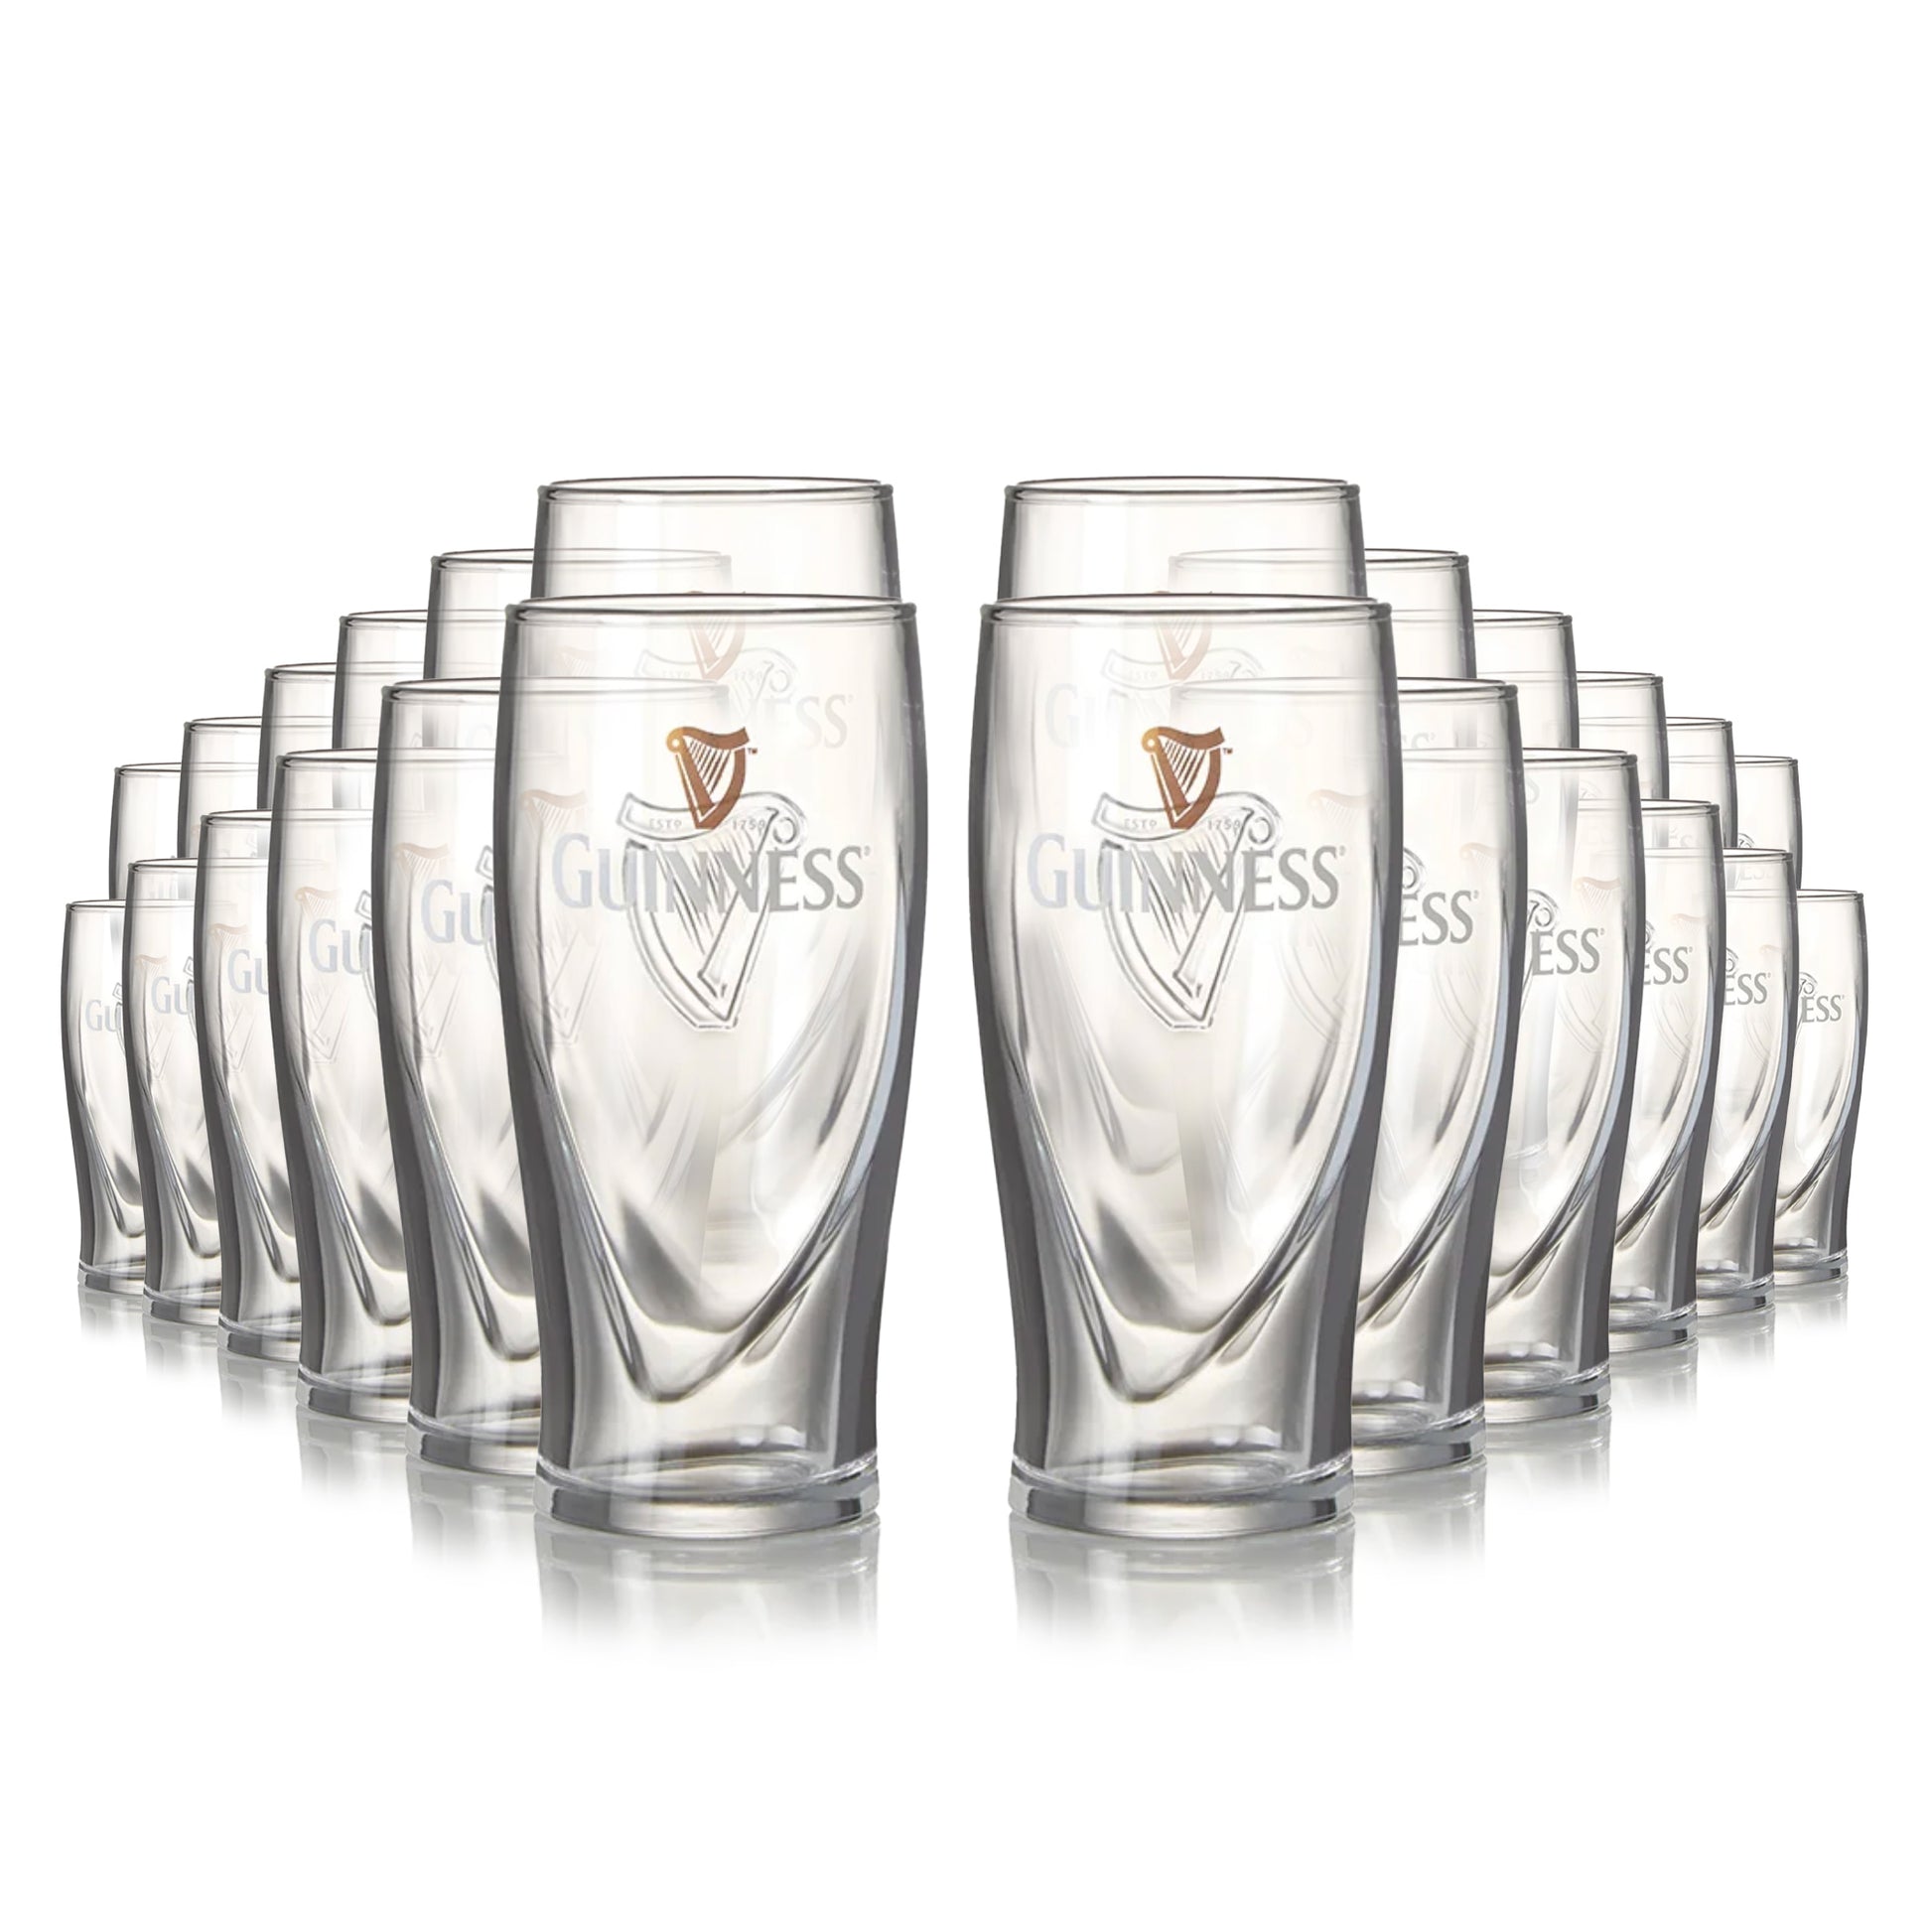 Guinness Half Pint Glass 24 Pack in a row on a white background.